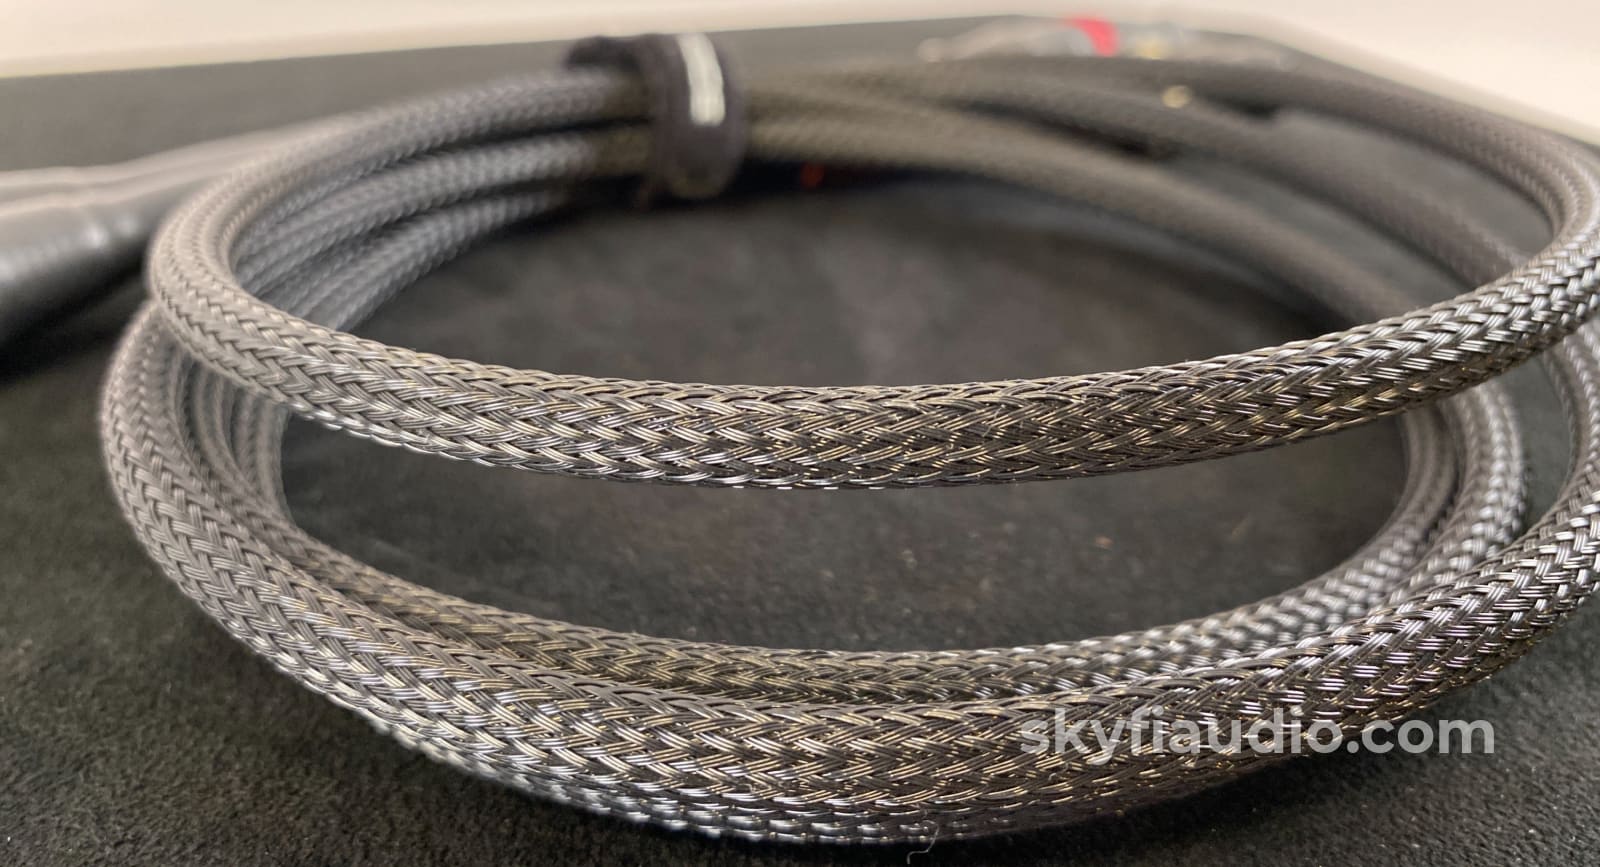 Nbs (Nothing But Signal) Mine Serpent Ii - M/S-Ii Xlr Audio Cable 1M Cables